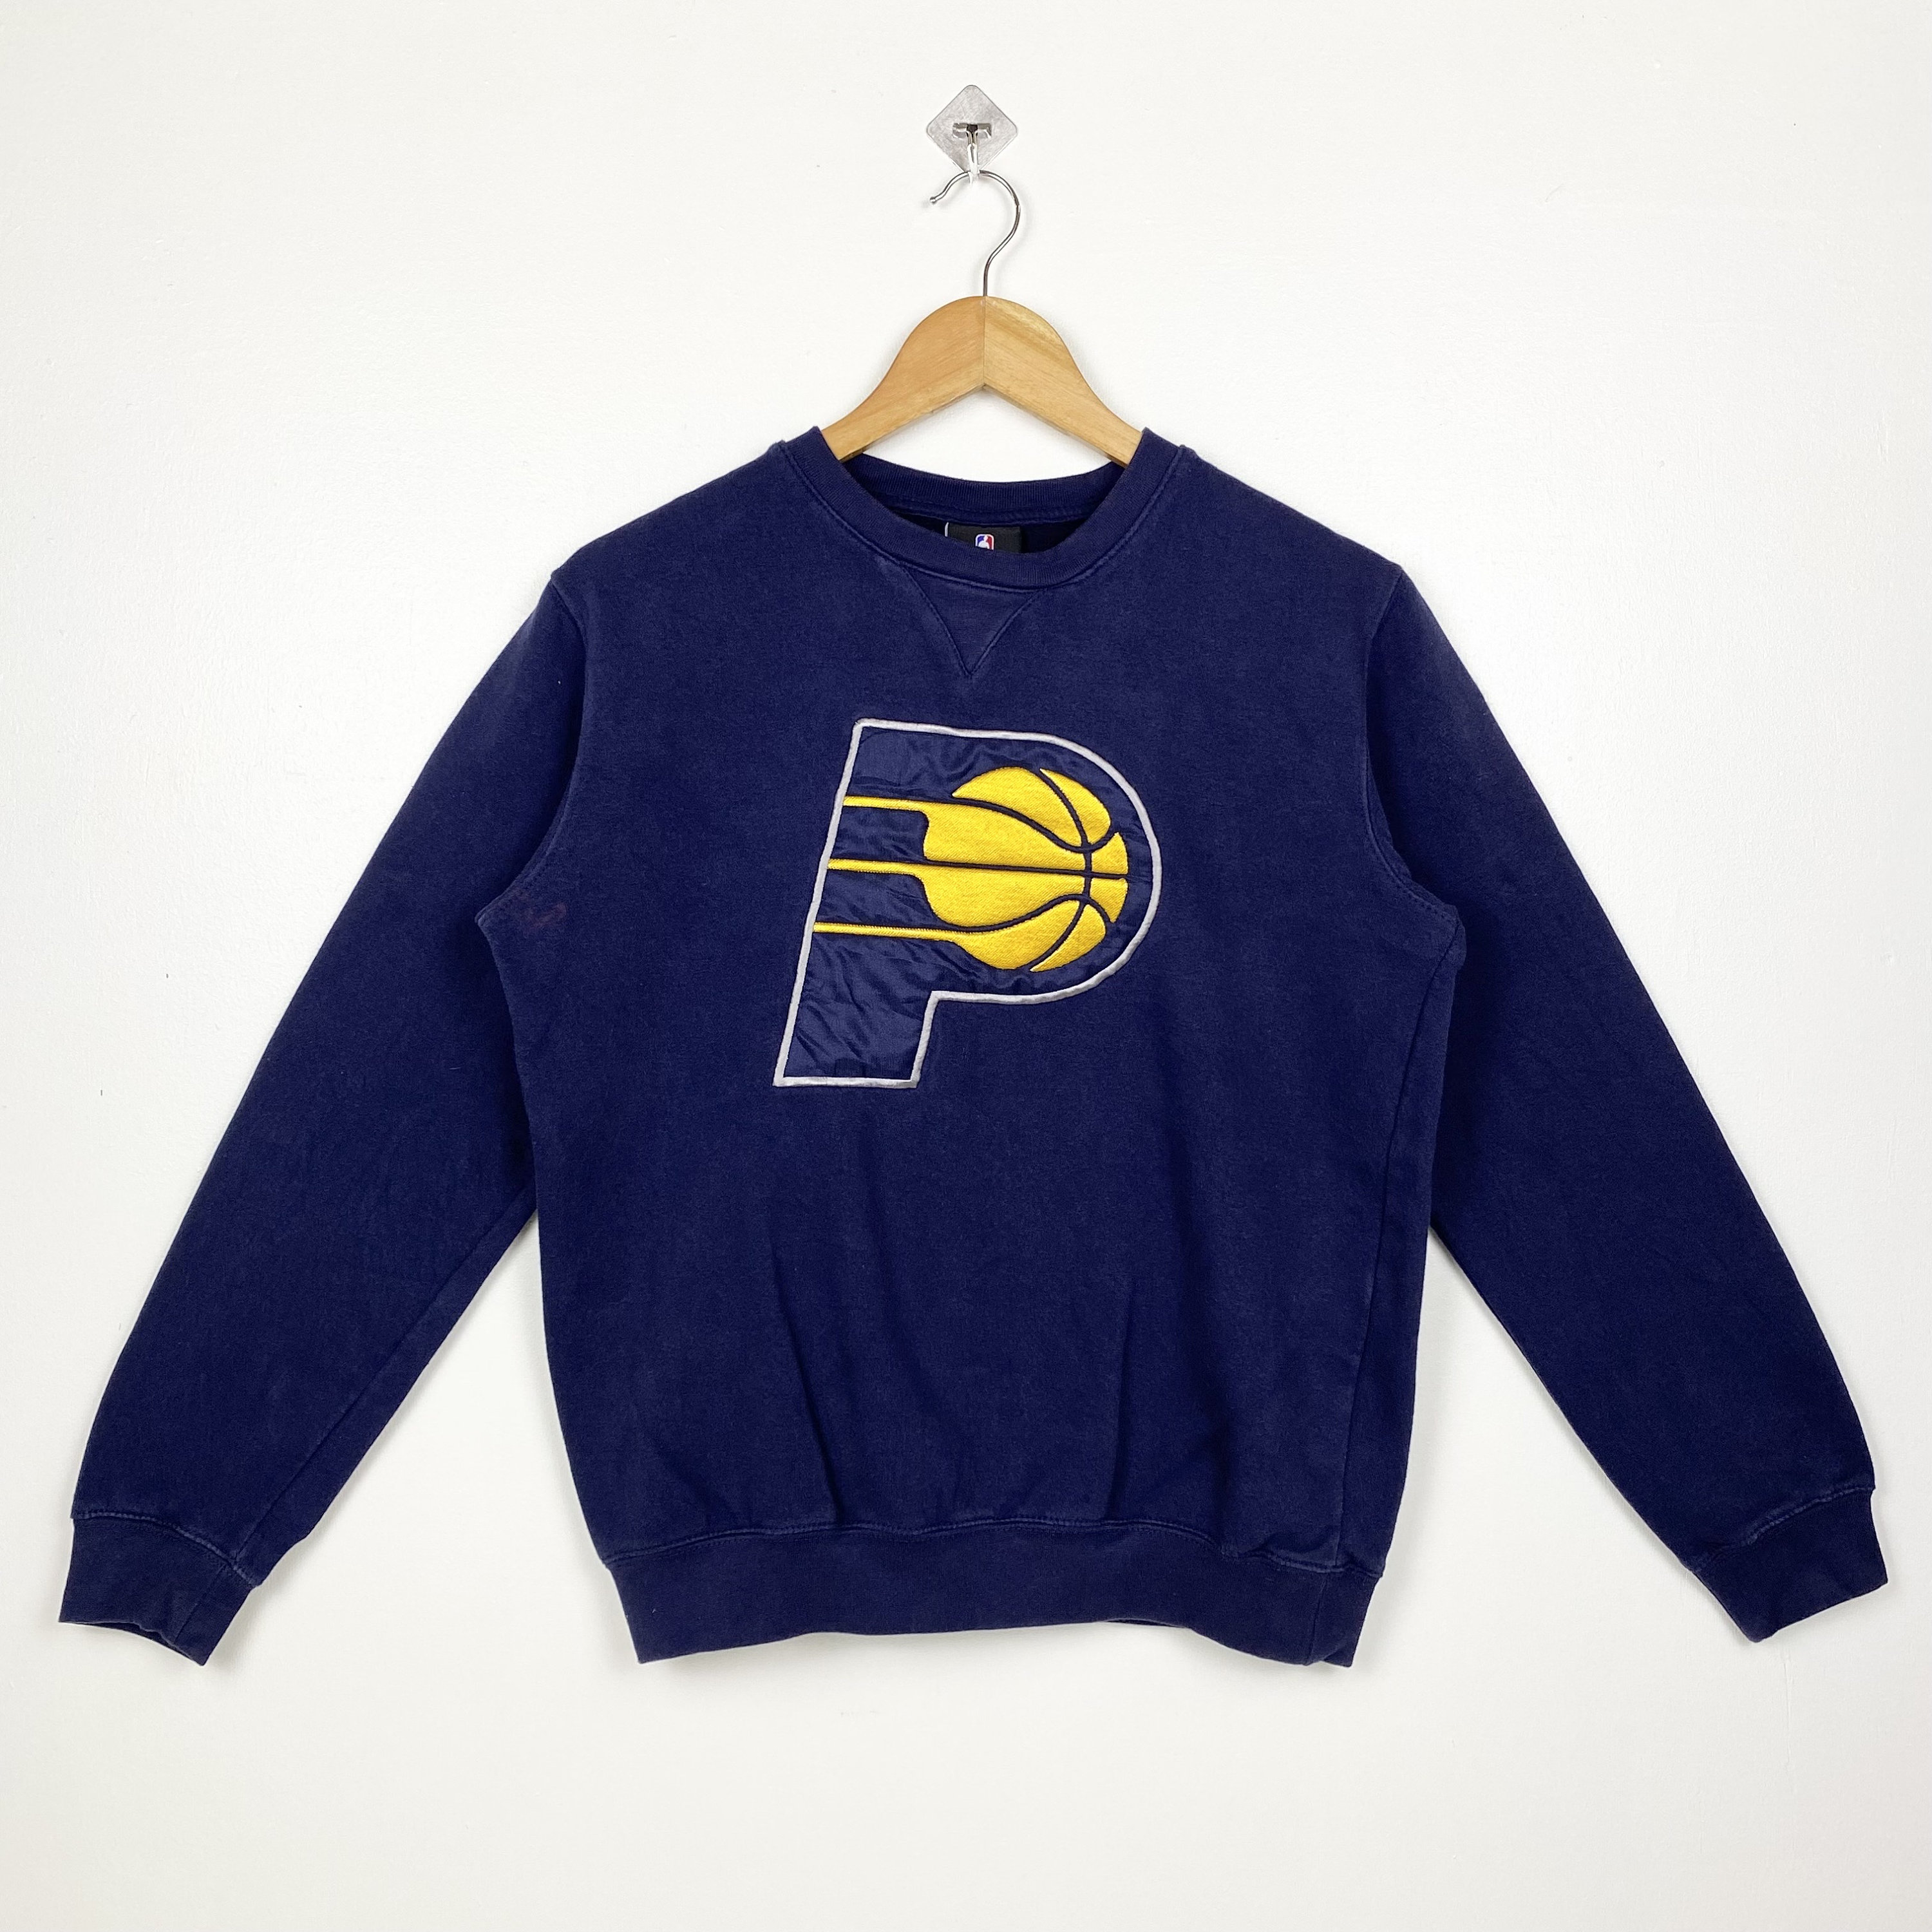 Indiana Pacers, One of a KIND Vintage Sweatshirt with Crystal Star Design